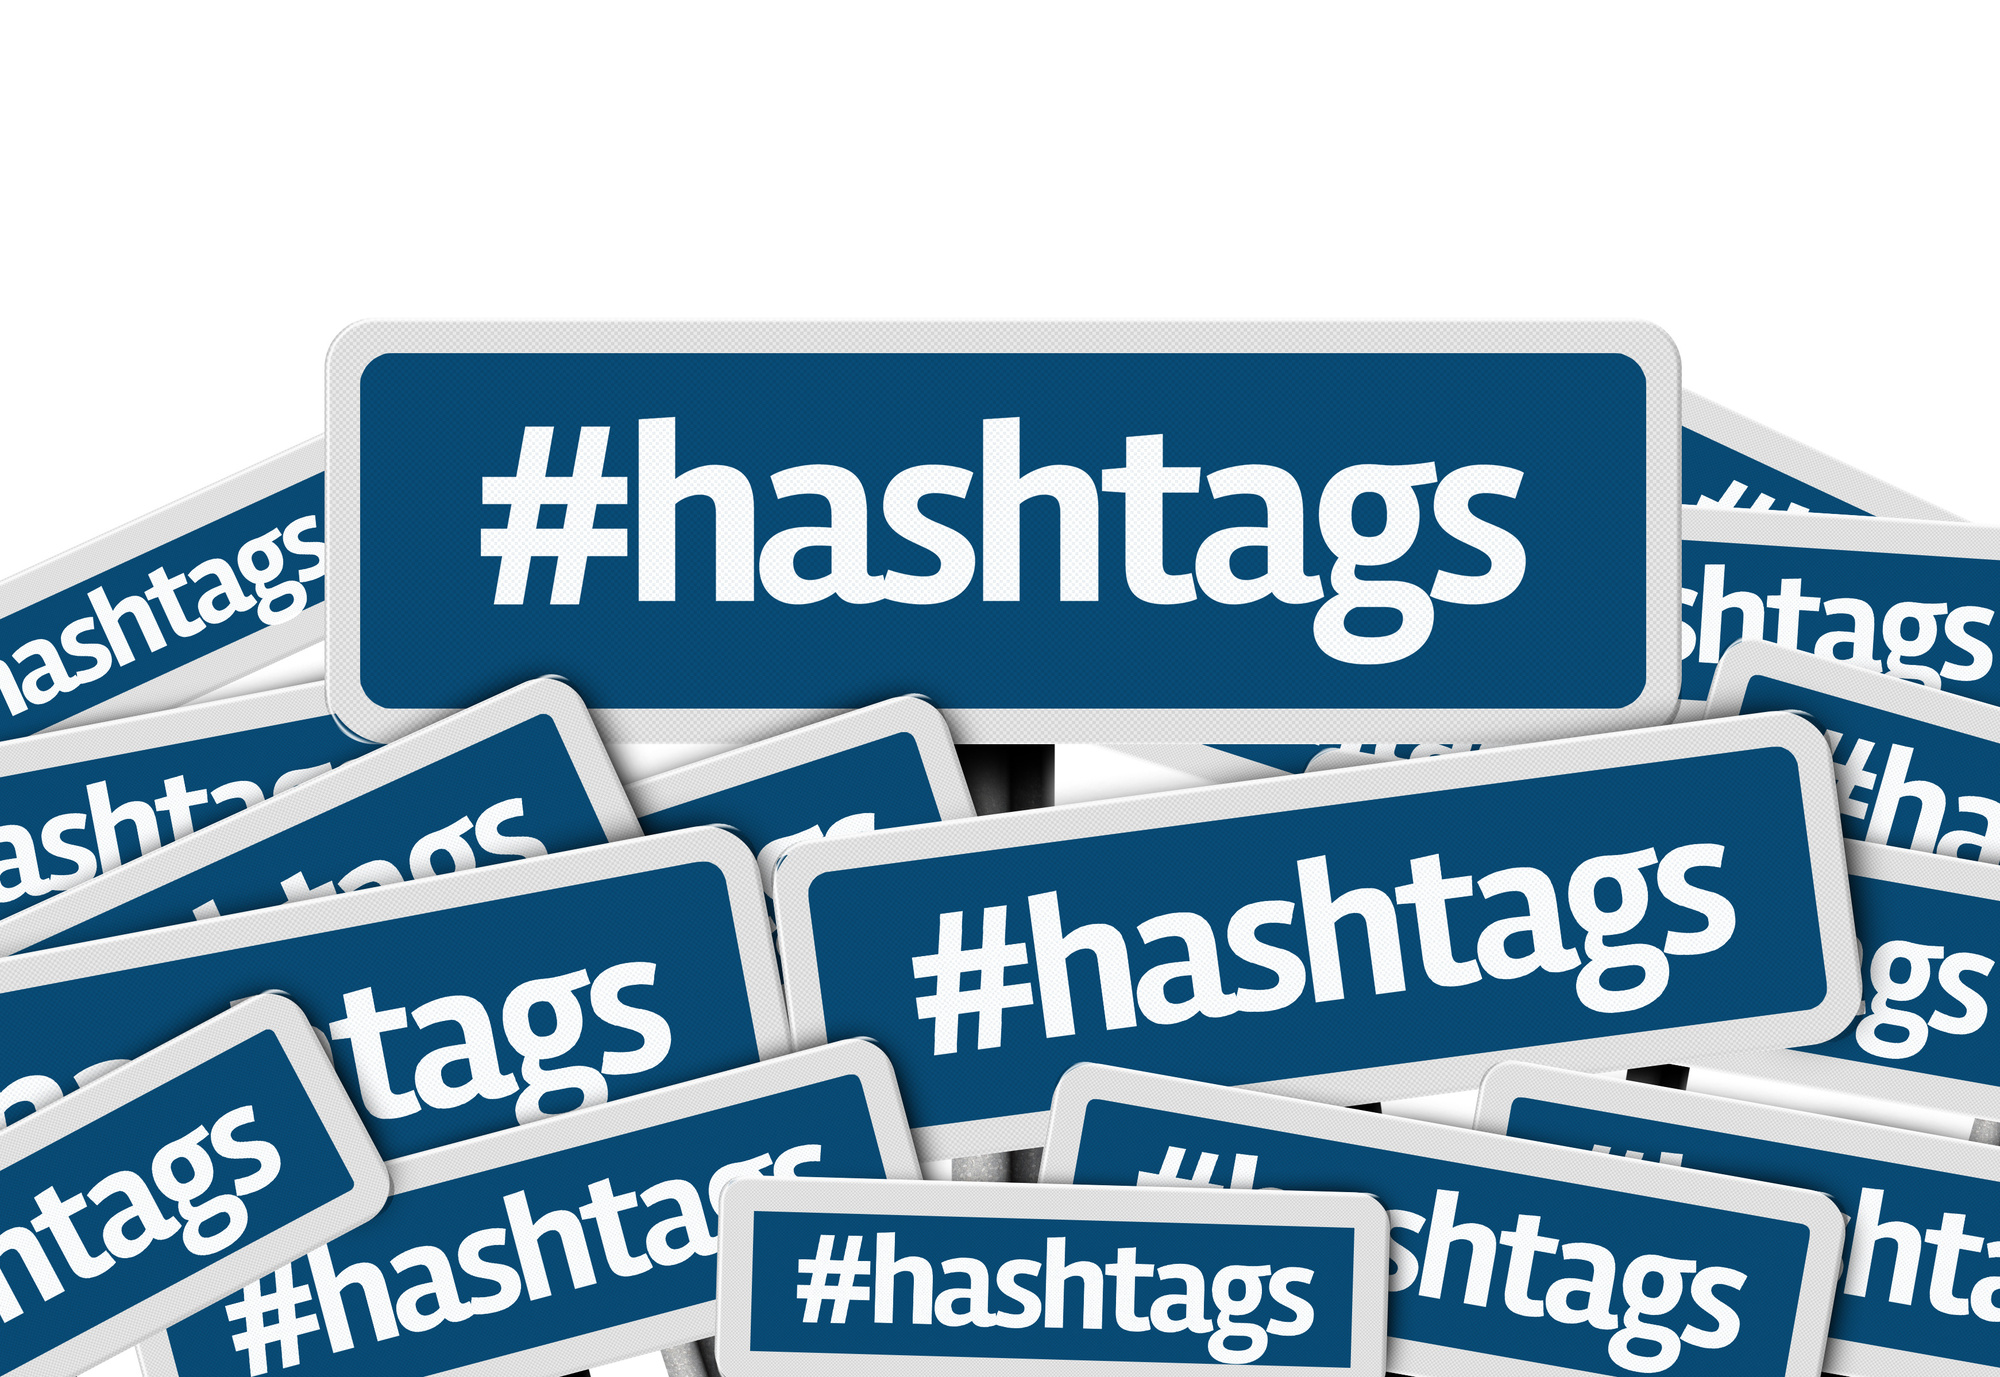 branded hashtags